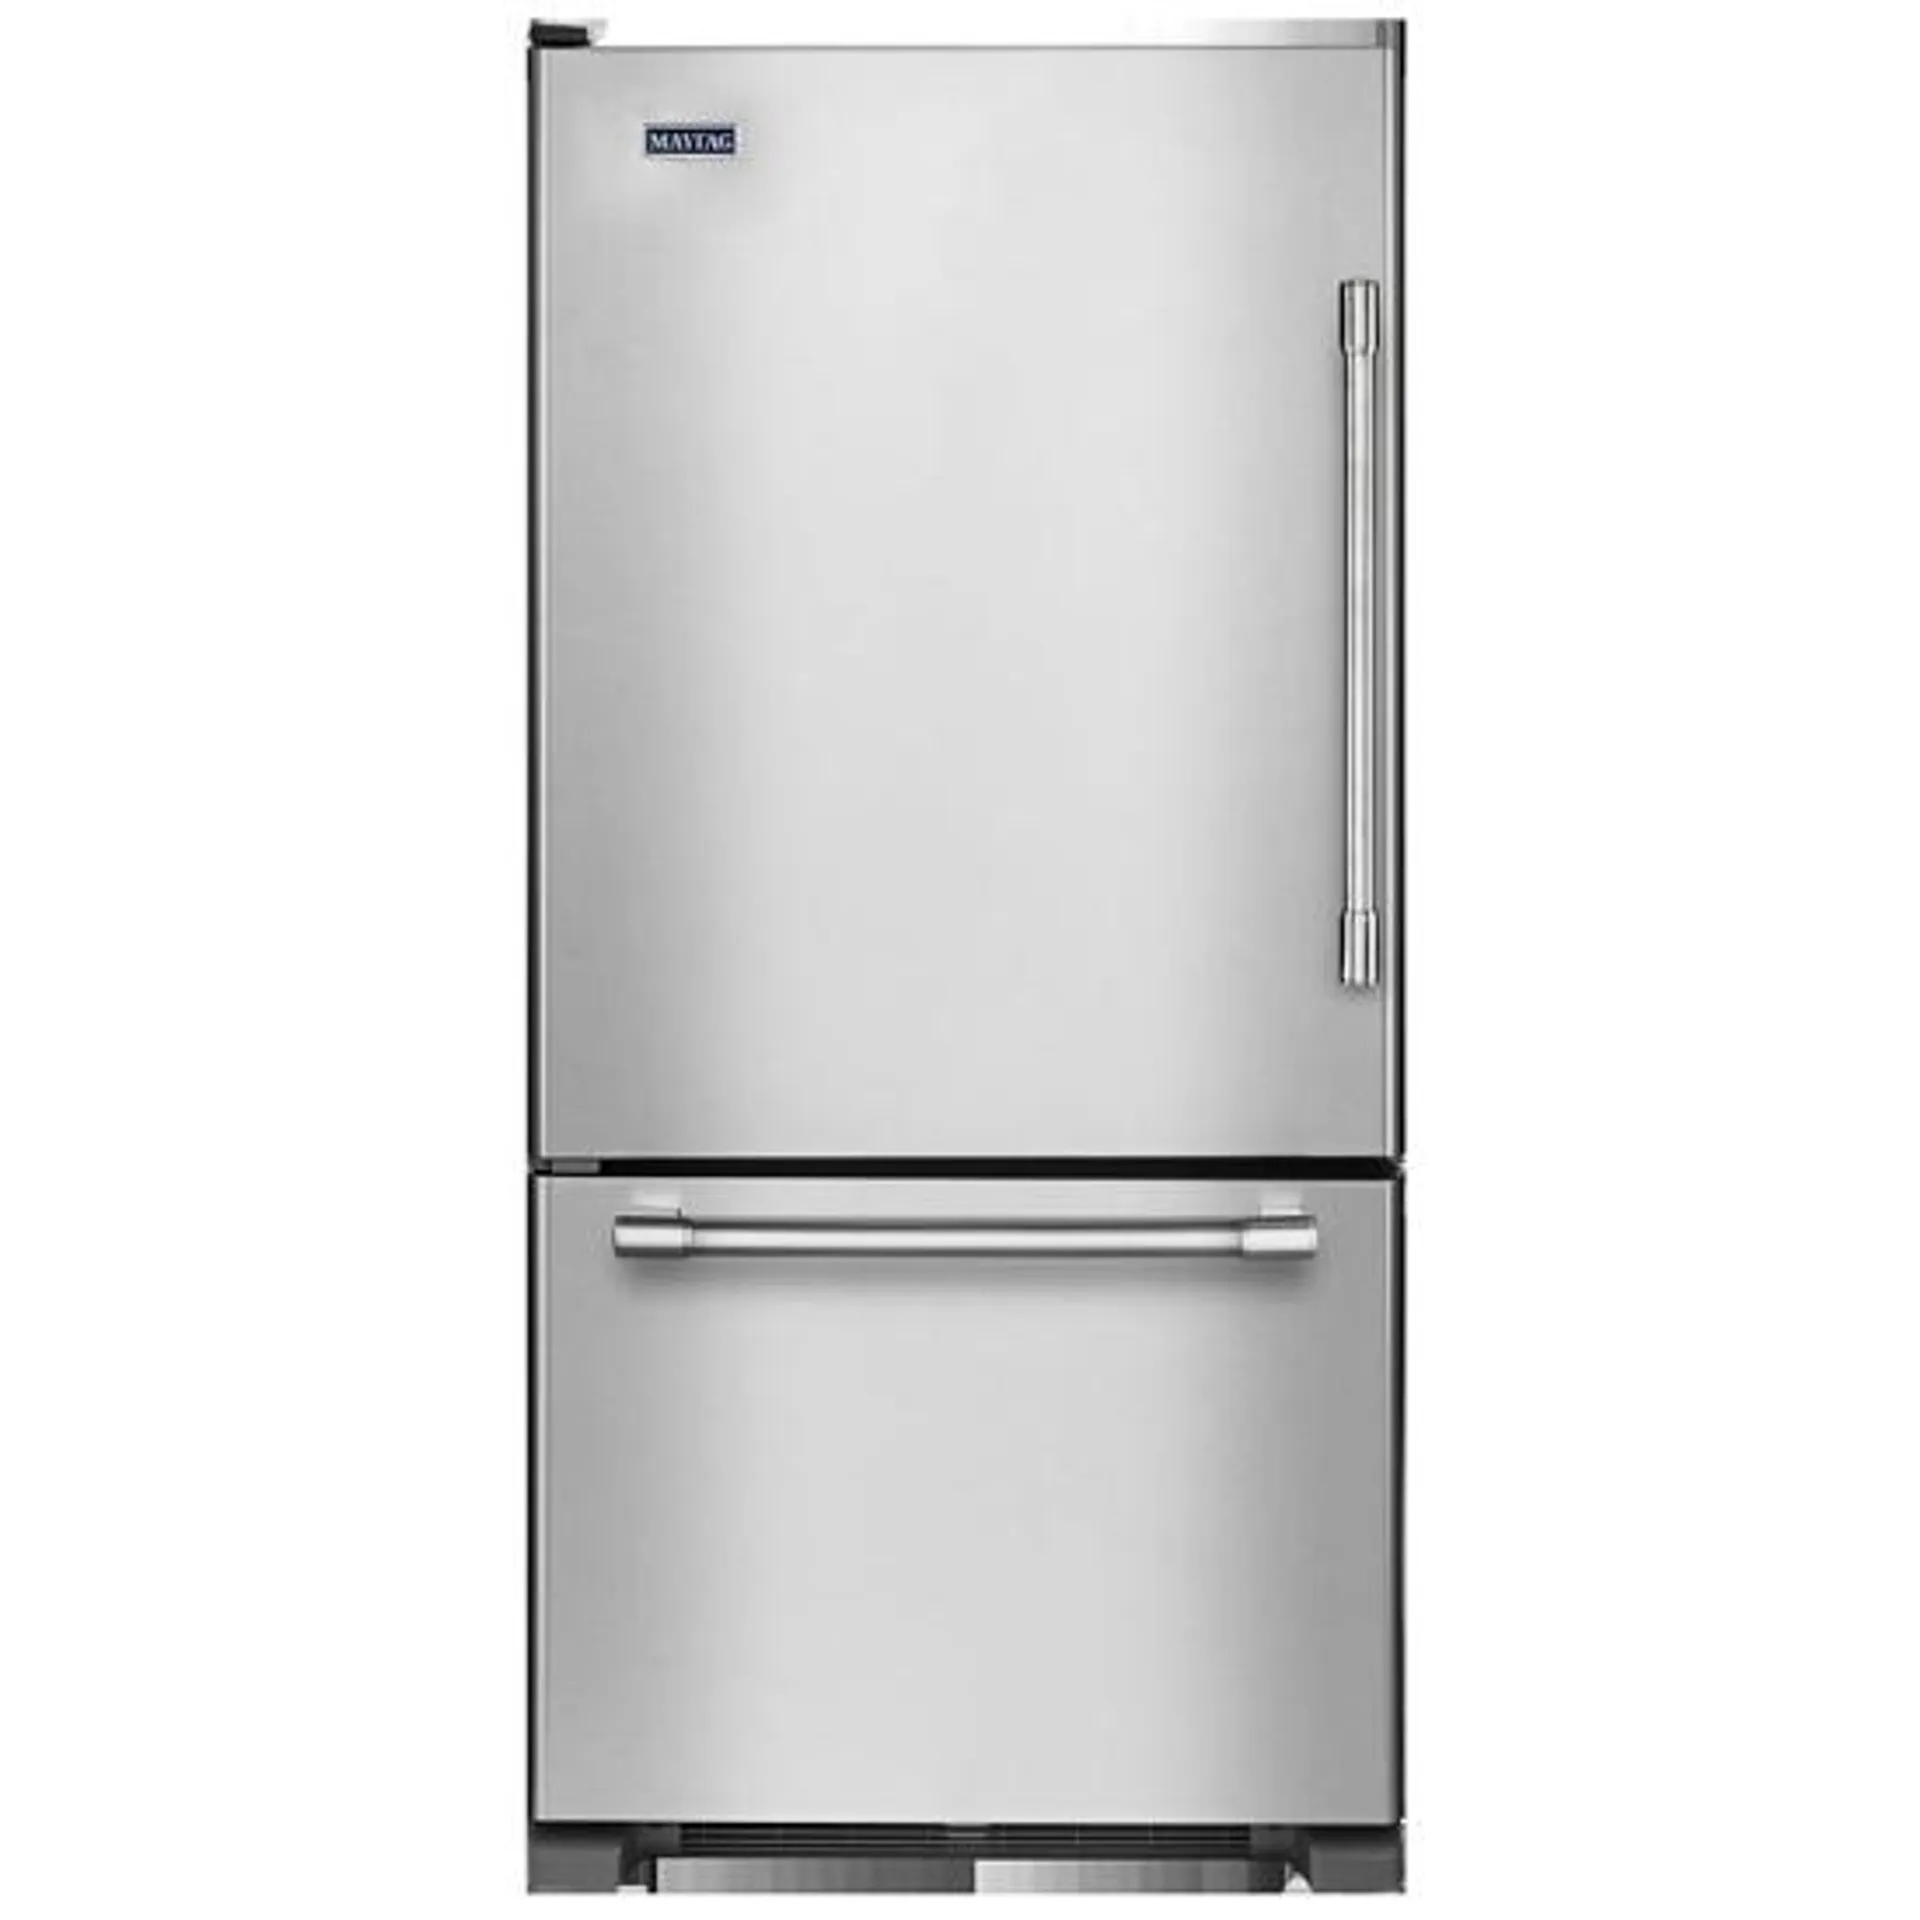 Maytag MBL1957FEZ Bottom Freezer Refrigerator, 30 inch Width, ENERGY STAR Certified, 18.67 cu. ft. Capacity, Stainless Steel colour